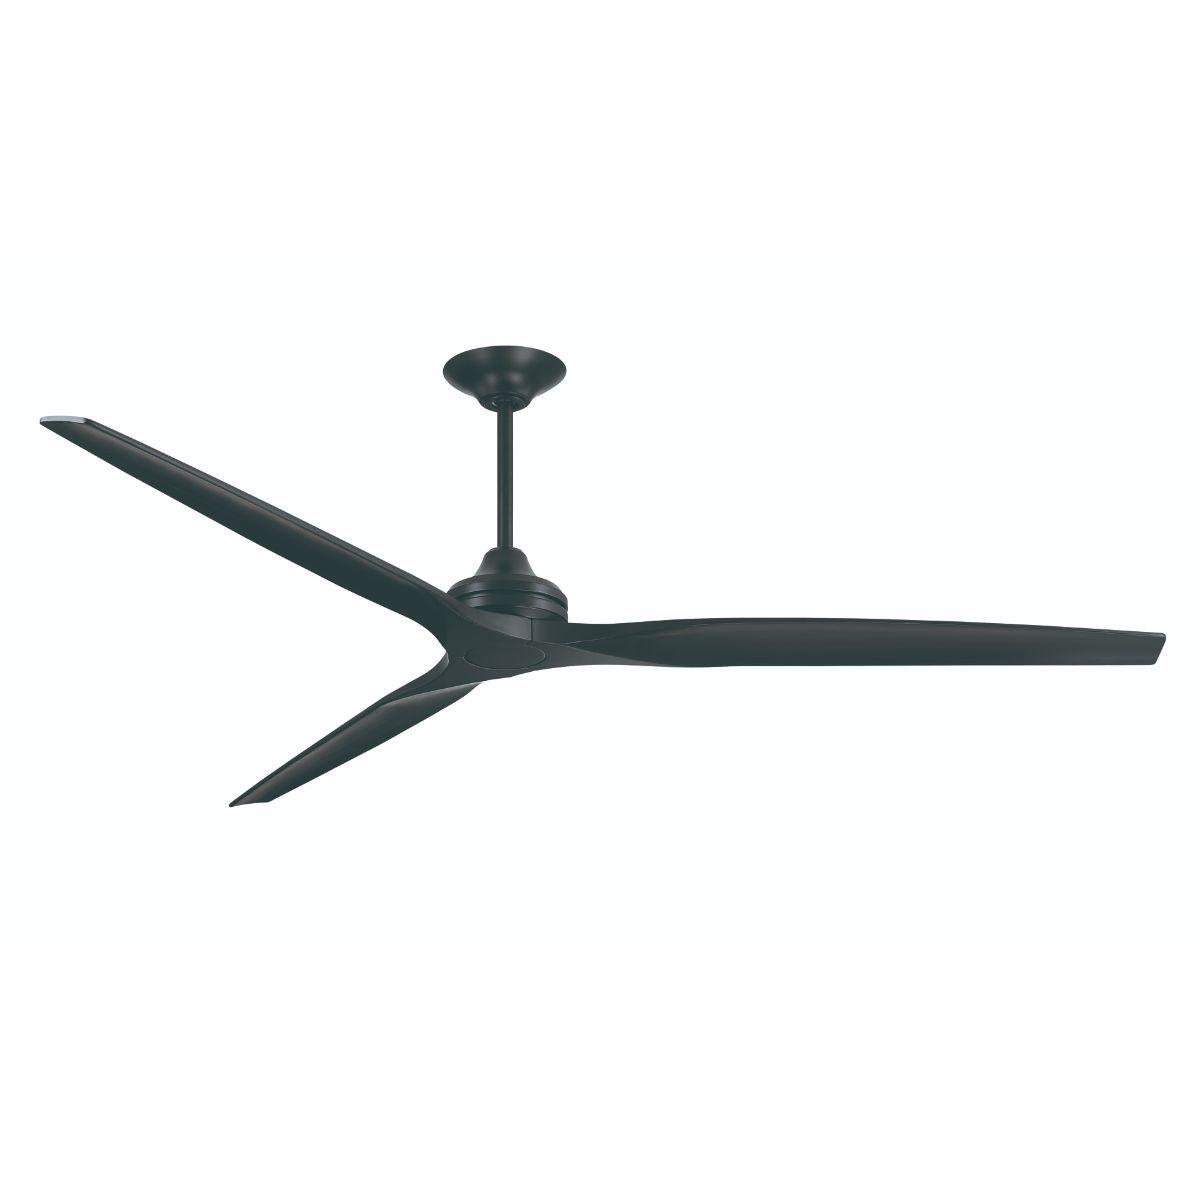 Spitfire DC Outdoor Ceiling Fan Motor With Remote, Set of 3 Blades Sold Separately - Bees Lighting